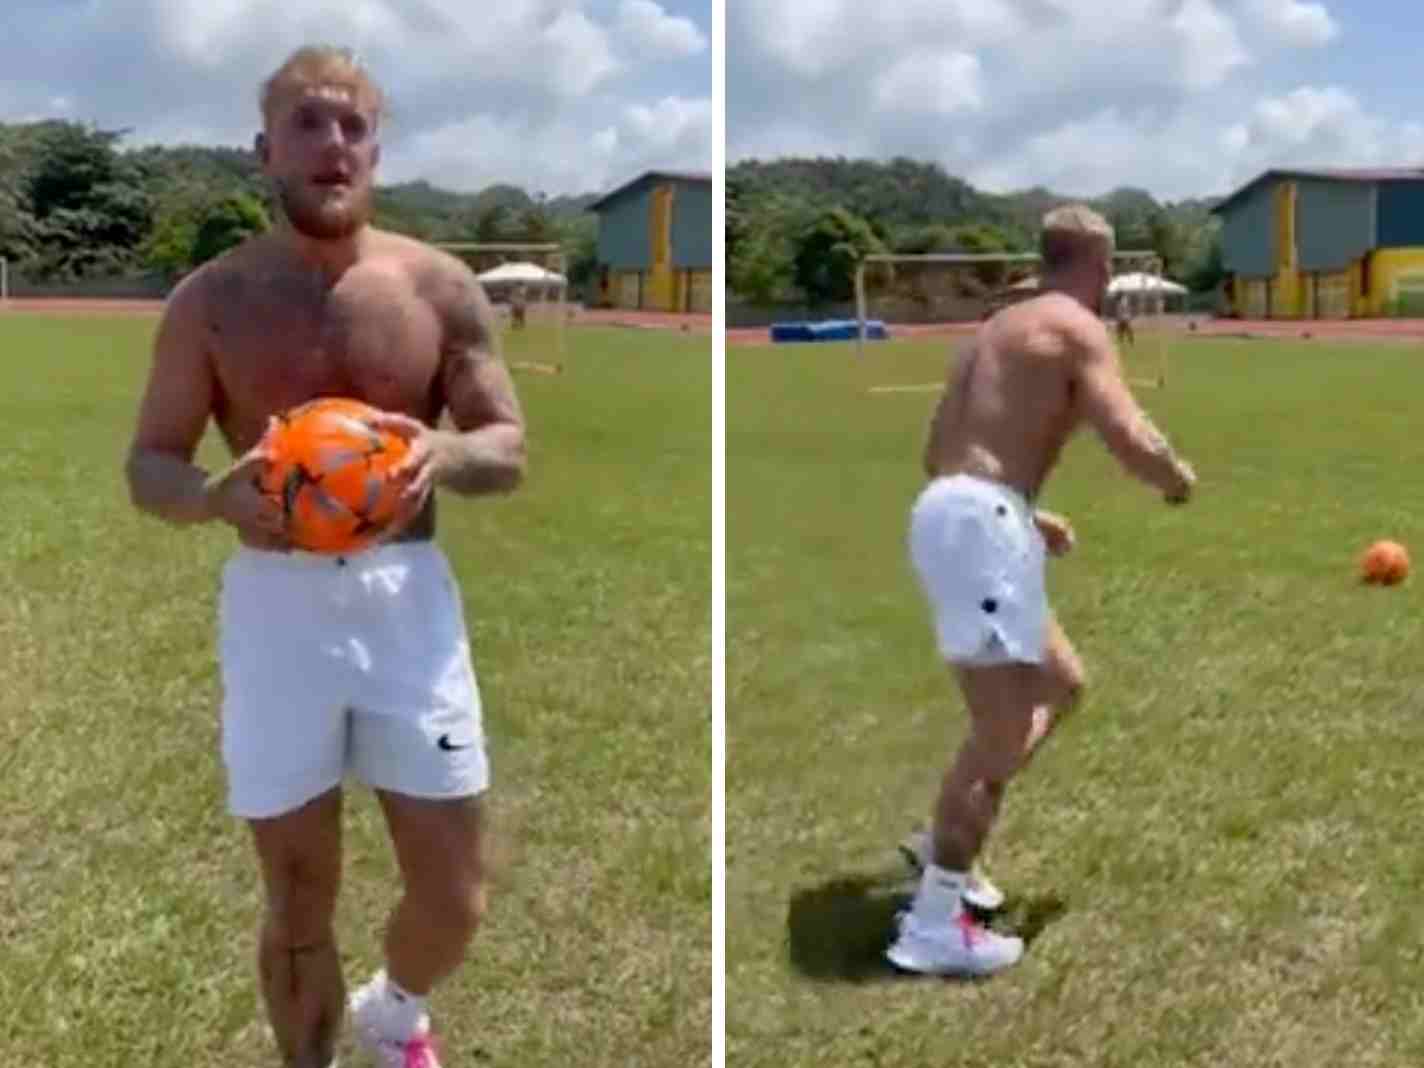 Video of Jake Paul kicking a football is going viral for the most awful reasons